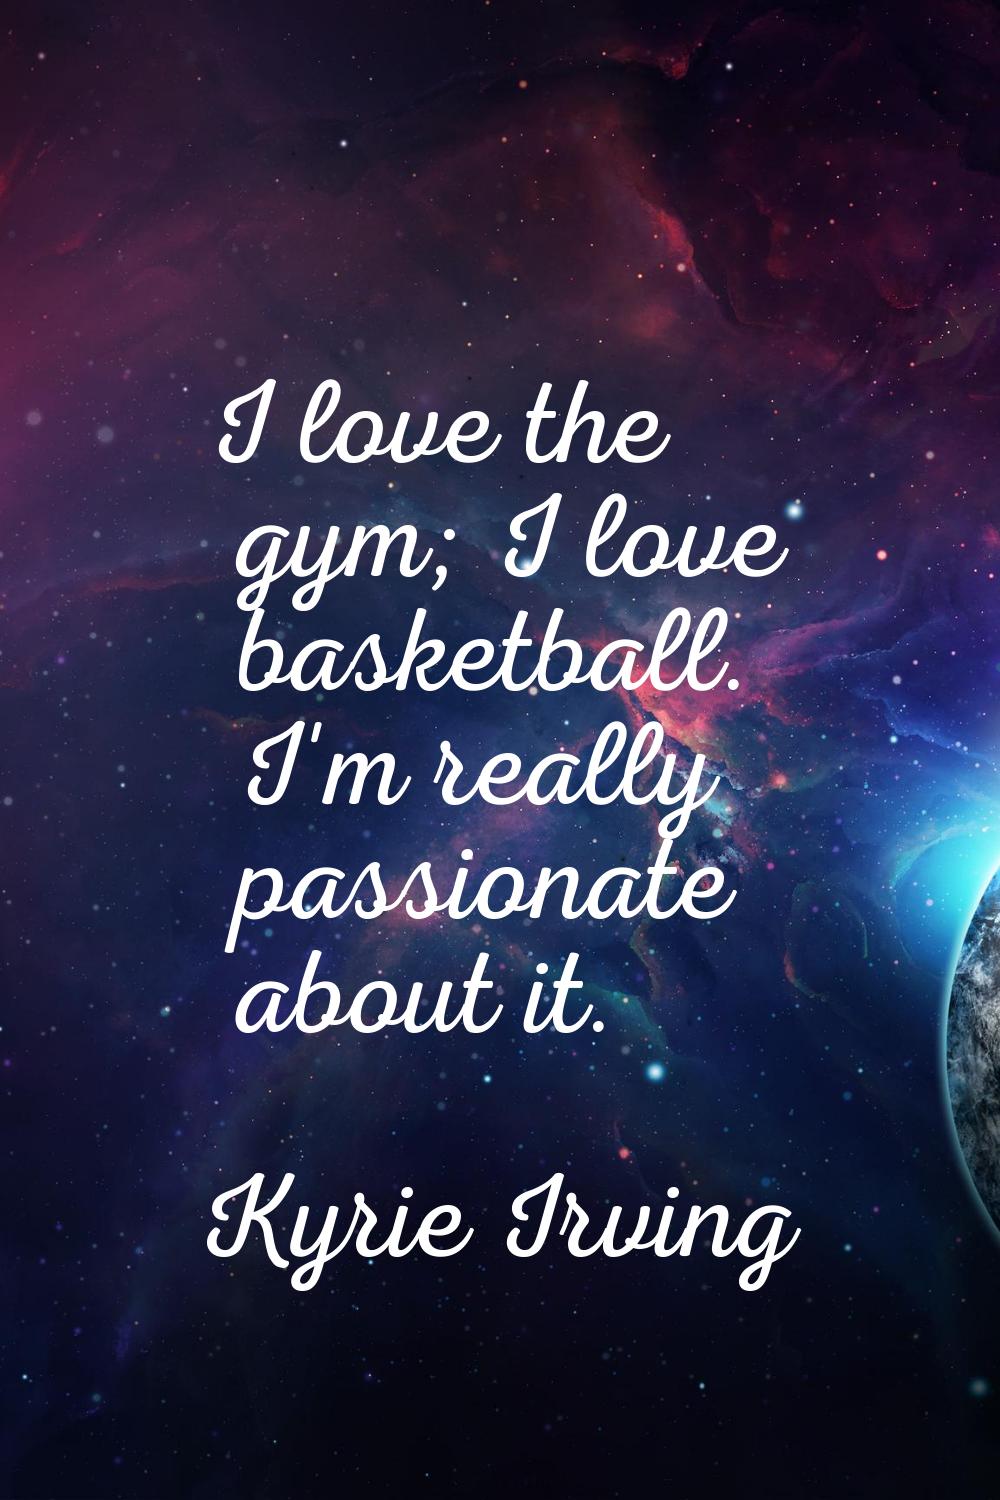 I love the gym; I love basketball. I'm really passionate about it.